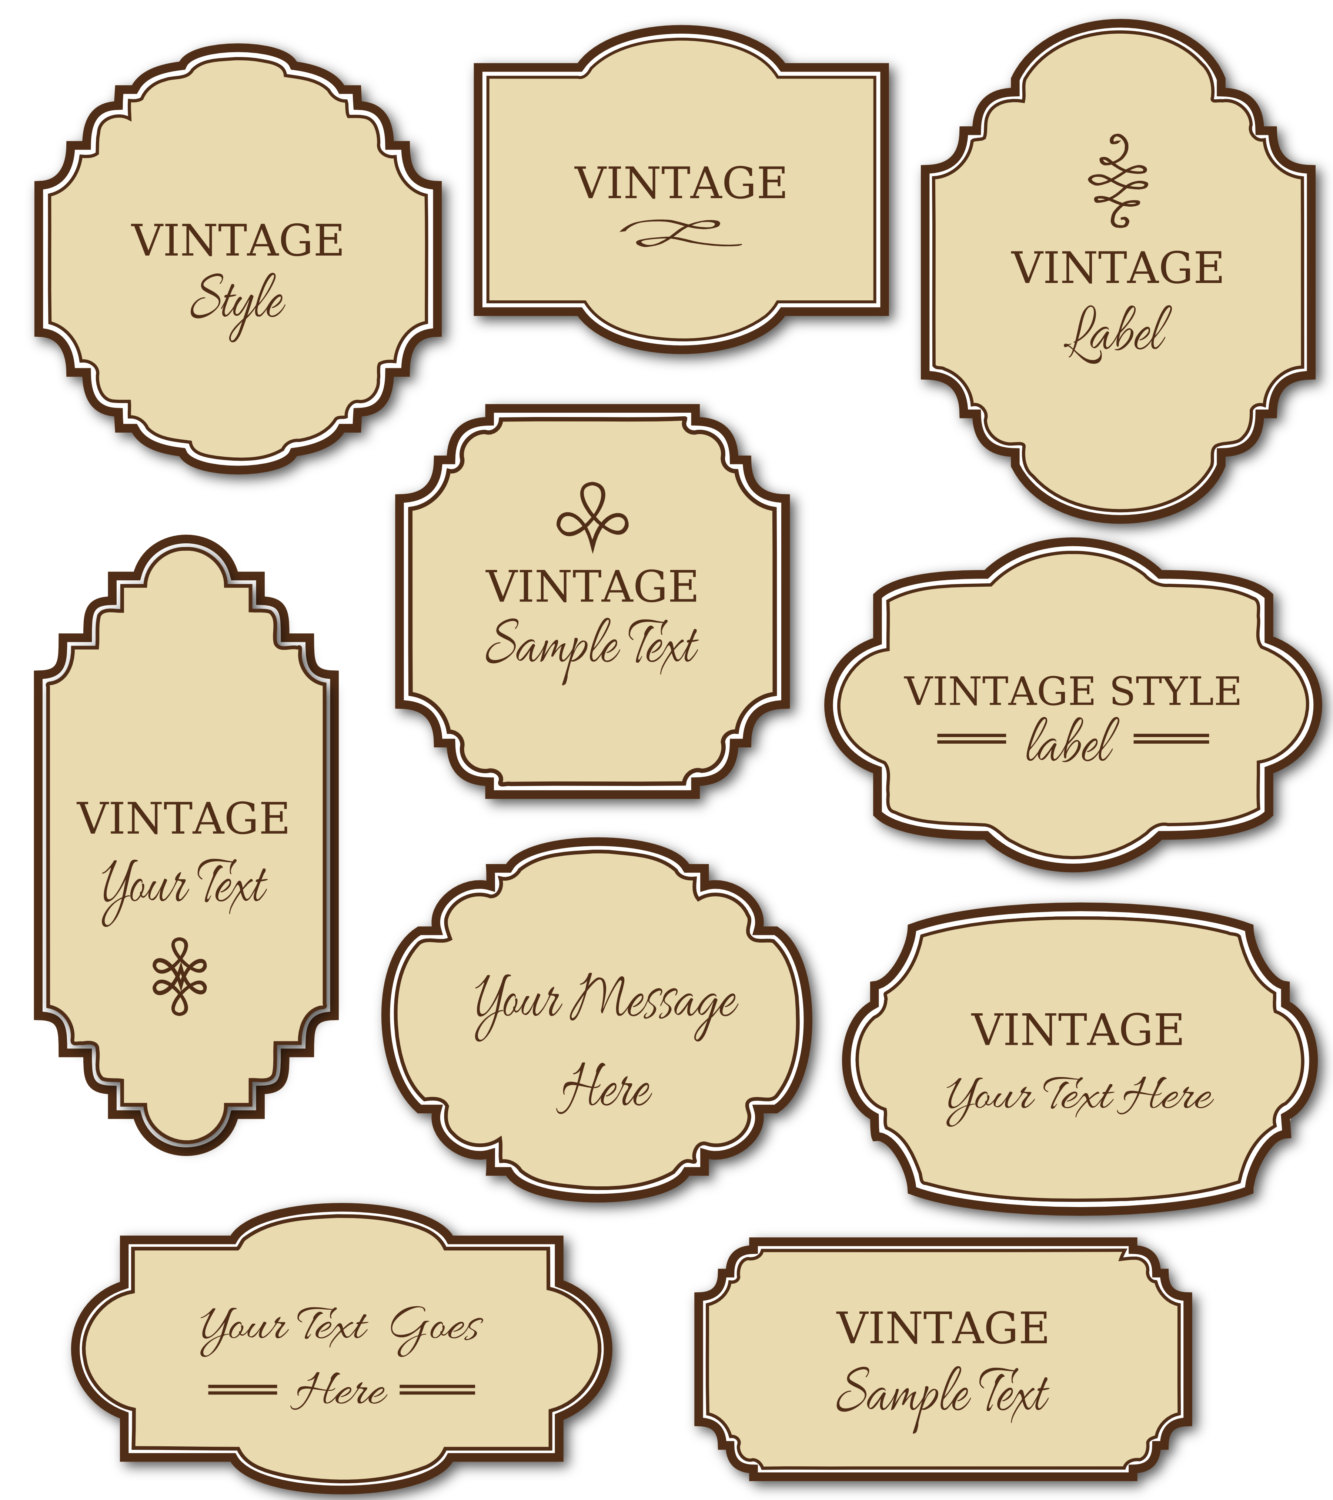 19-retro-label-templates-free-images-free-vintage-tag-label-template